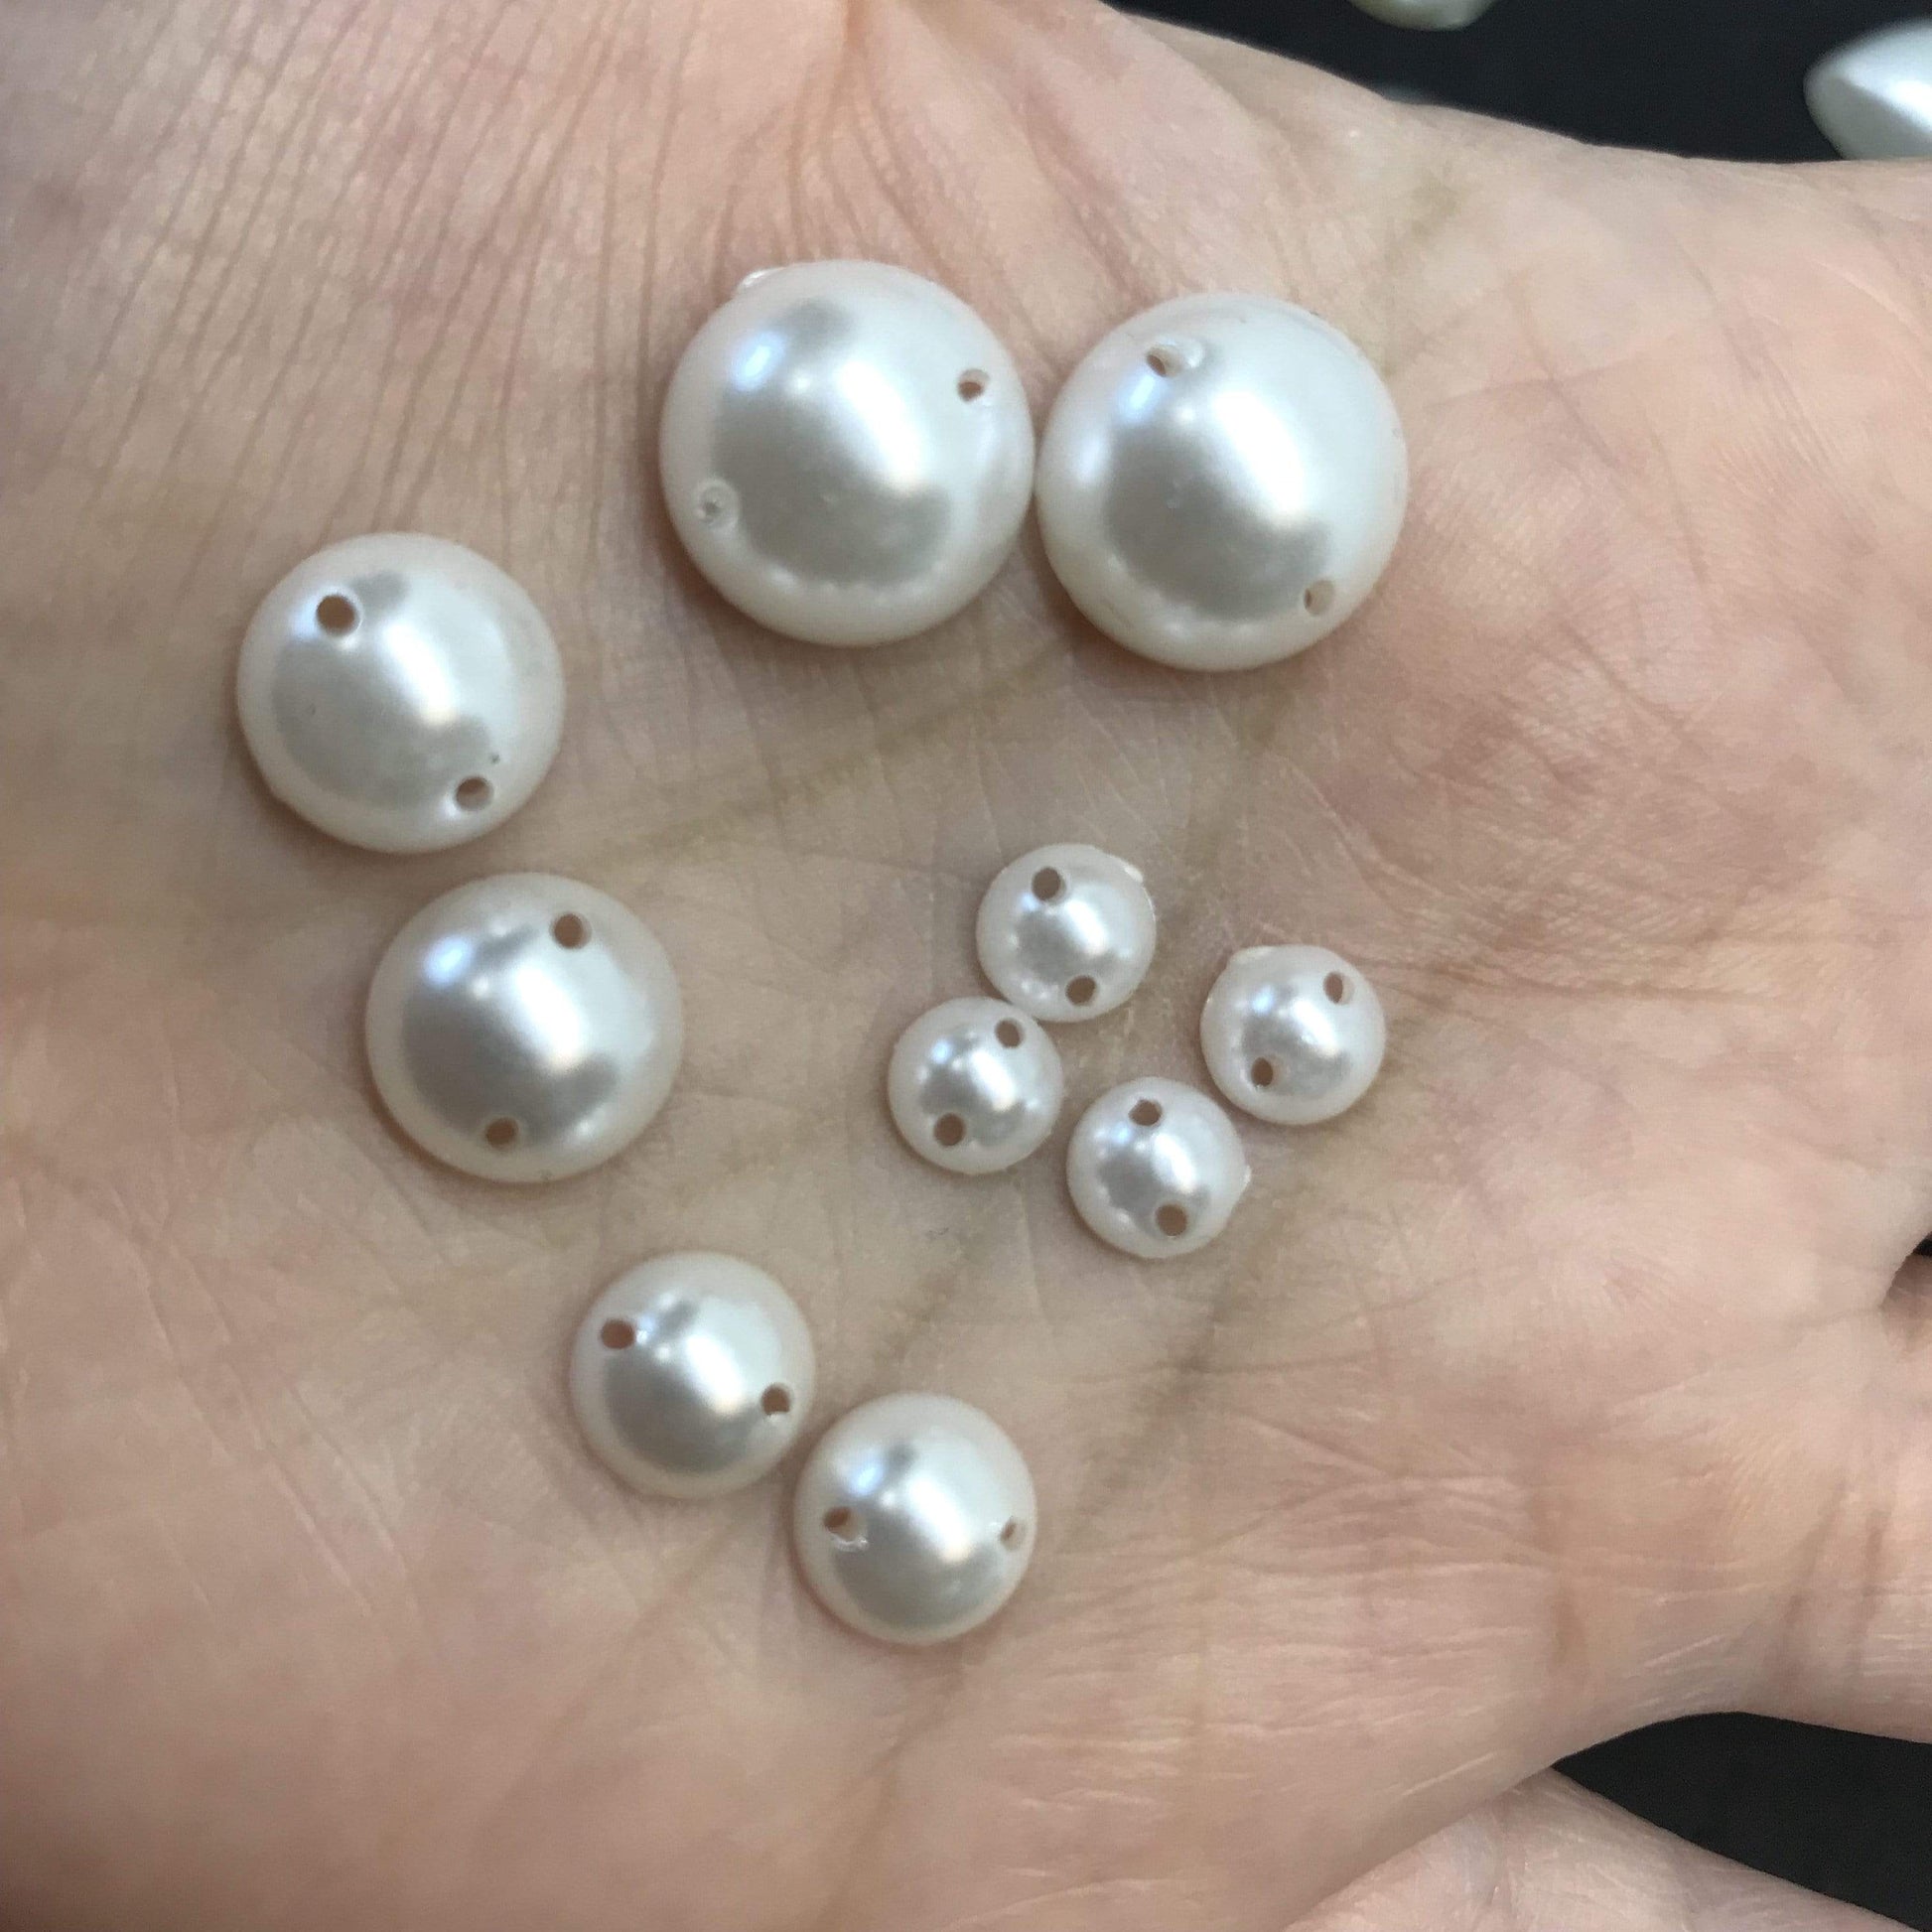 Sundaylace Creations & Bling Pearl Gems 6mm-12mm Sew on White Pearl Resin Gem